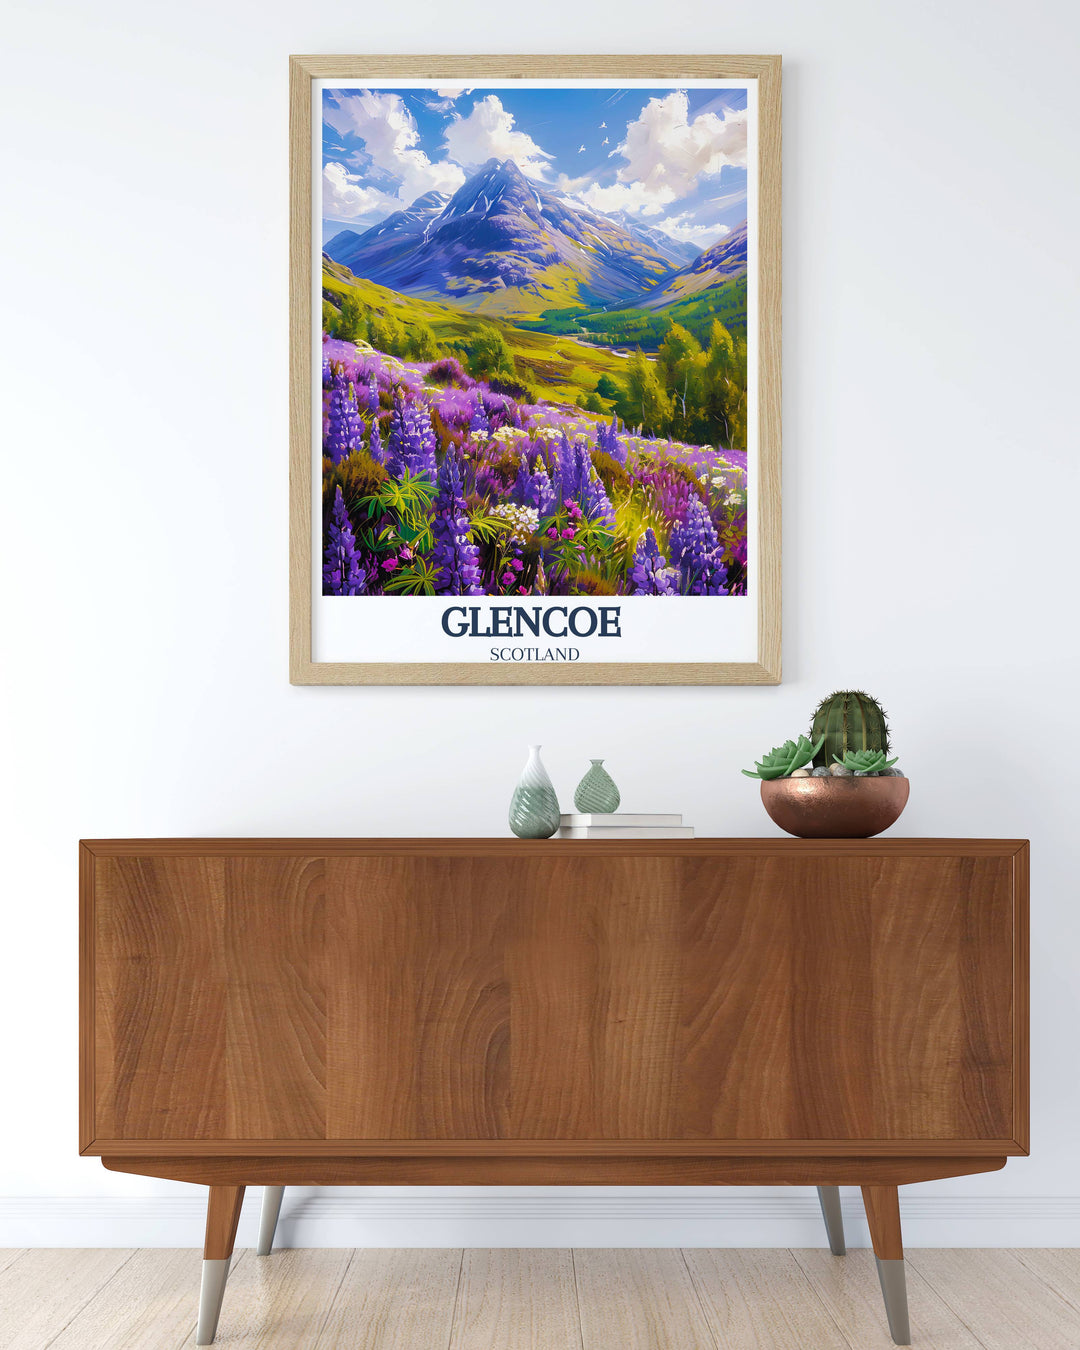 Embrace the romance of Scottish highlands with Lovers Scotland Art, where each brushstroke tells a story of love, adventure, and beauty in Glencoe.